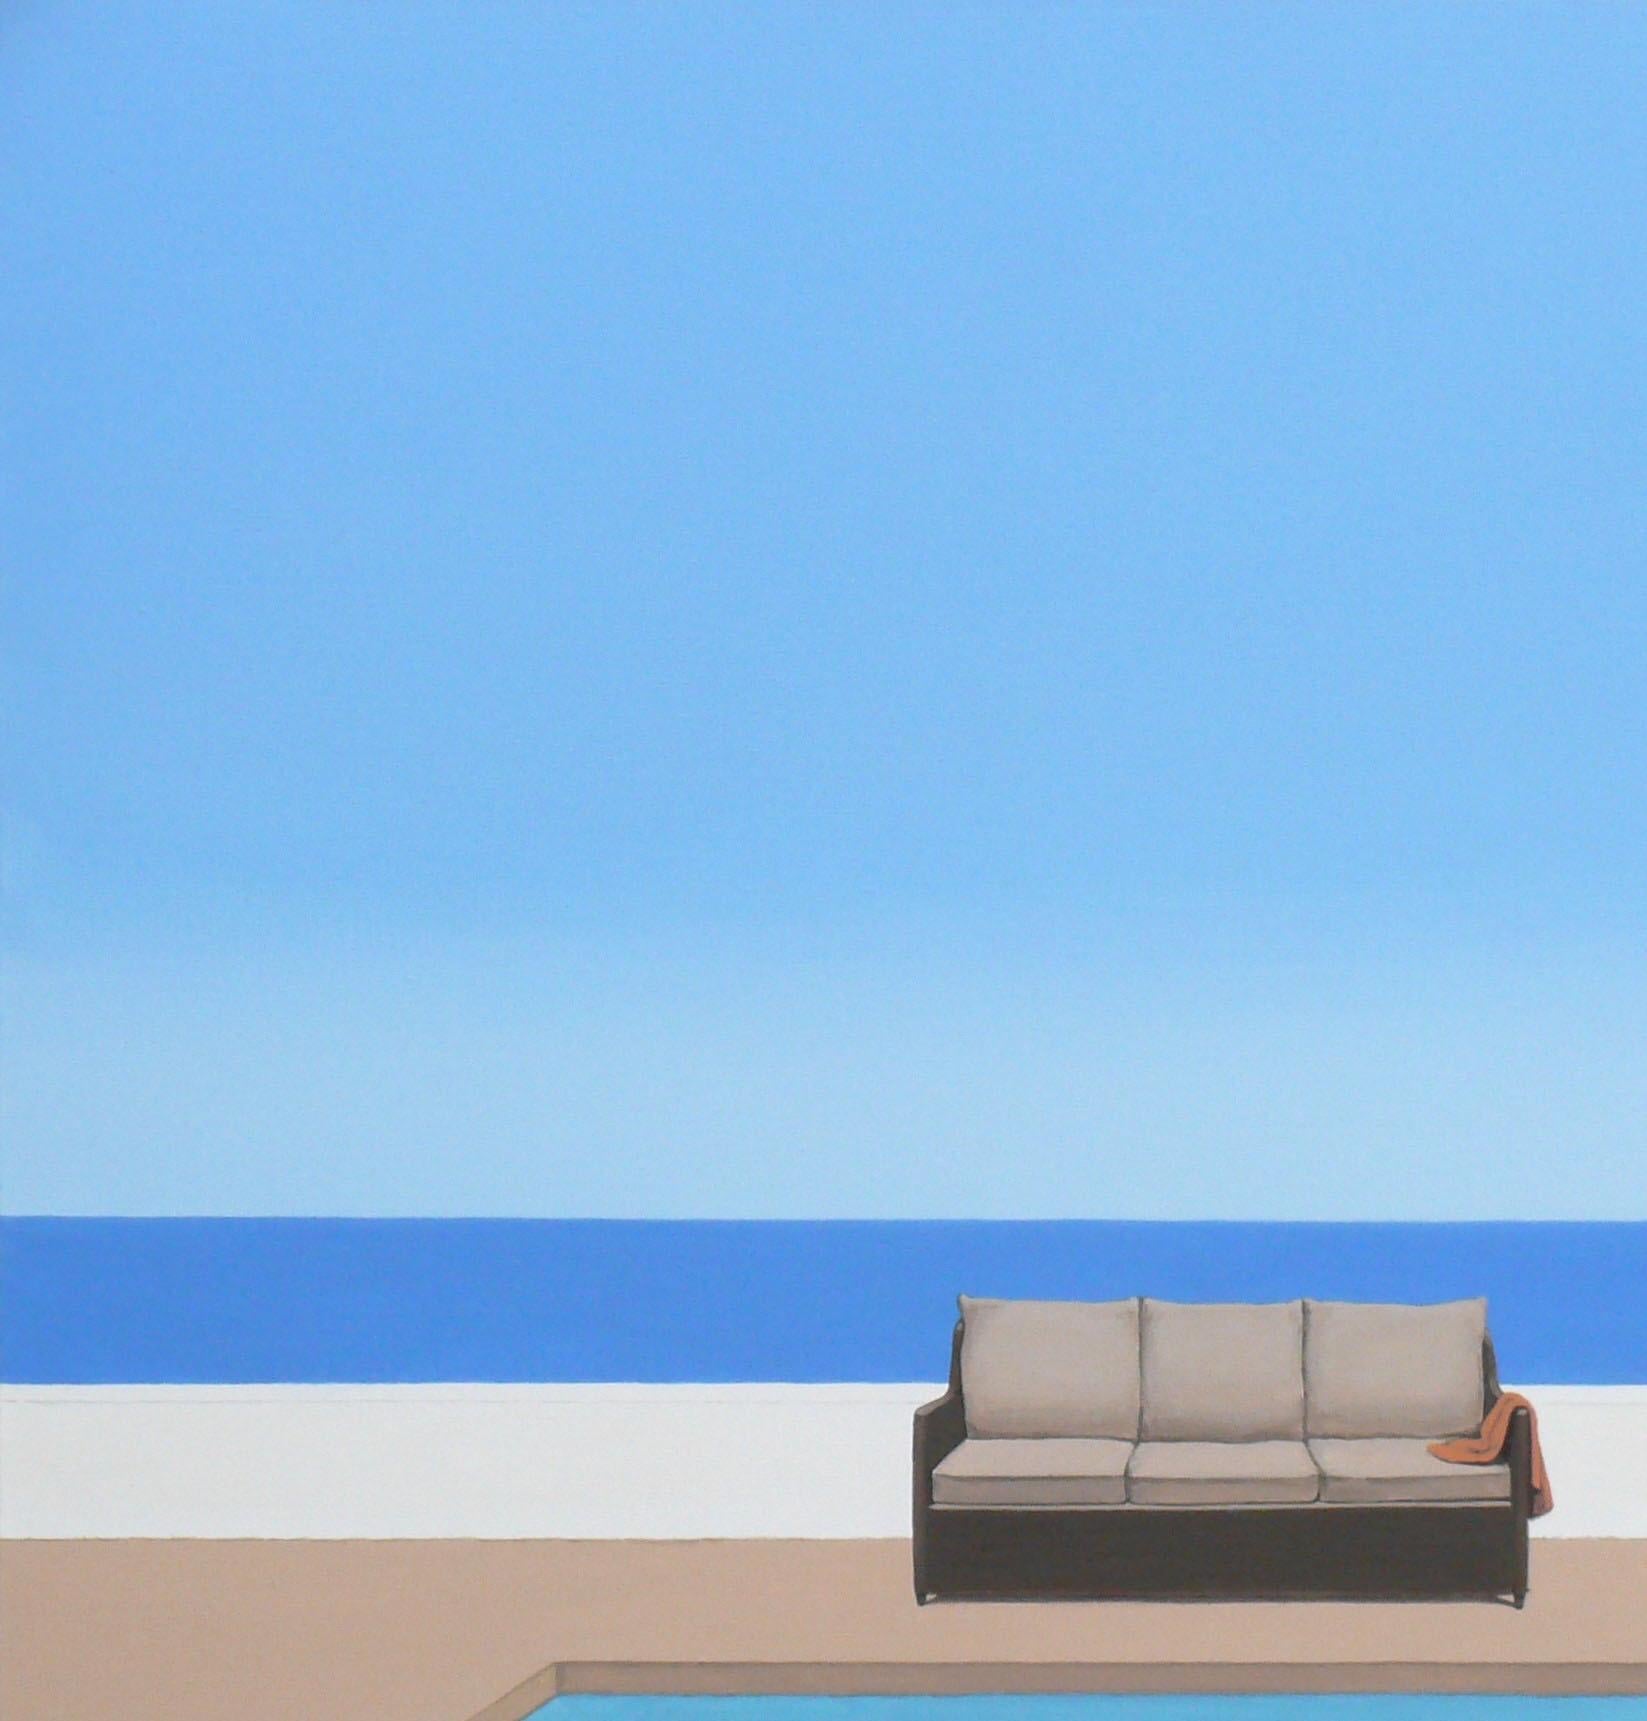 Pool by the ocean - landscape painting - Contemporary Painting by Magdalena Laskowska